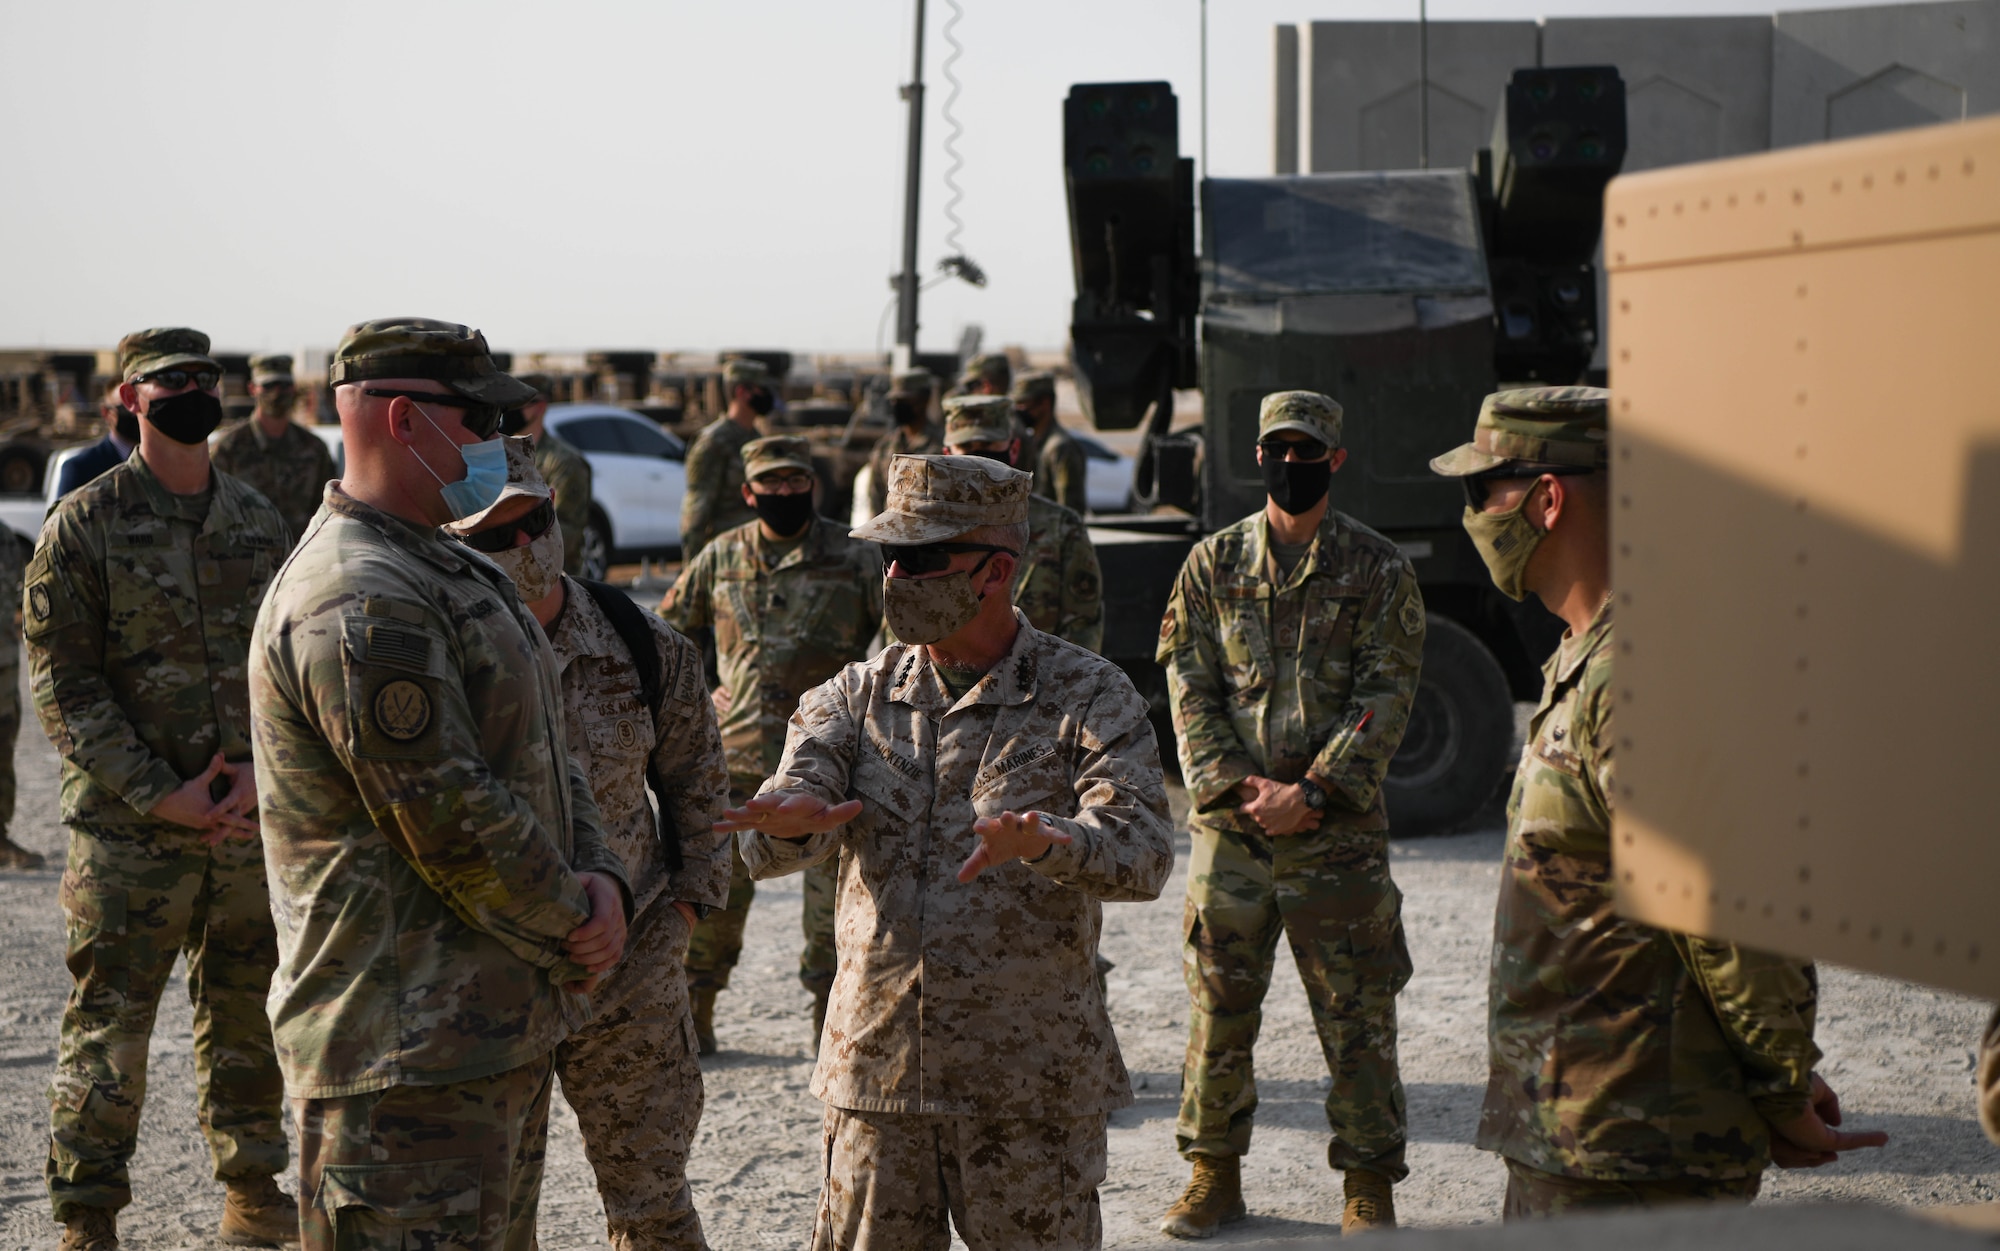 U.S. Marine Corps Gen. Kenneth F. McKenzie Jr., United States Central Command commander, talks to a group of Army Soldiers during a visit to the Alpha Battery 5-52 Air Defense Artillery Battalion, Sept. 13, 2020, at Al Dhafra Air Base, United Arab Emirates.